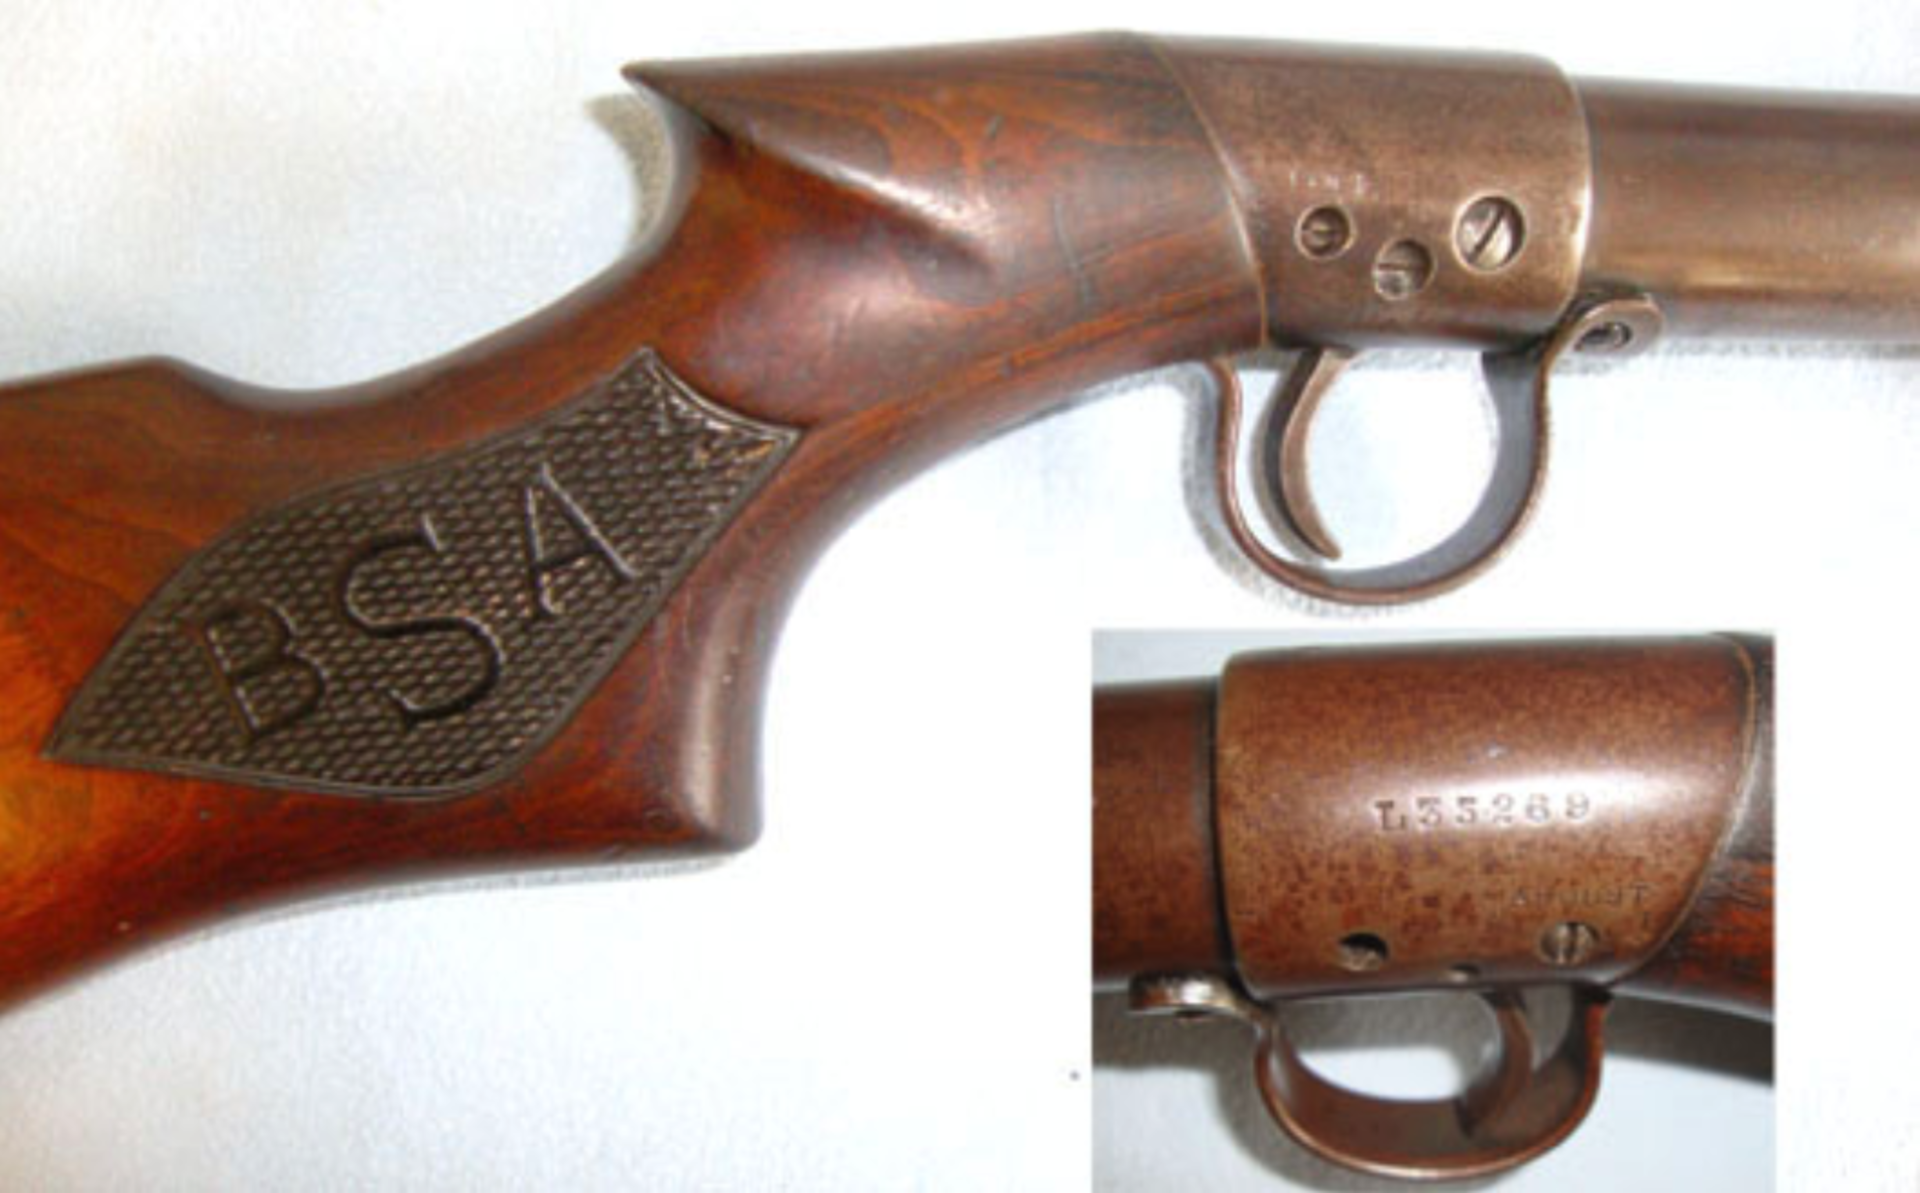 1938 B.S.A. Standard No. 1 Model (Aka 'L' Or Light/ Ladies Model) .177 Calibre Under Lever Air Rifle - Image 2 of 3